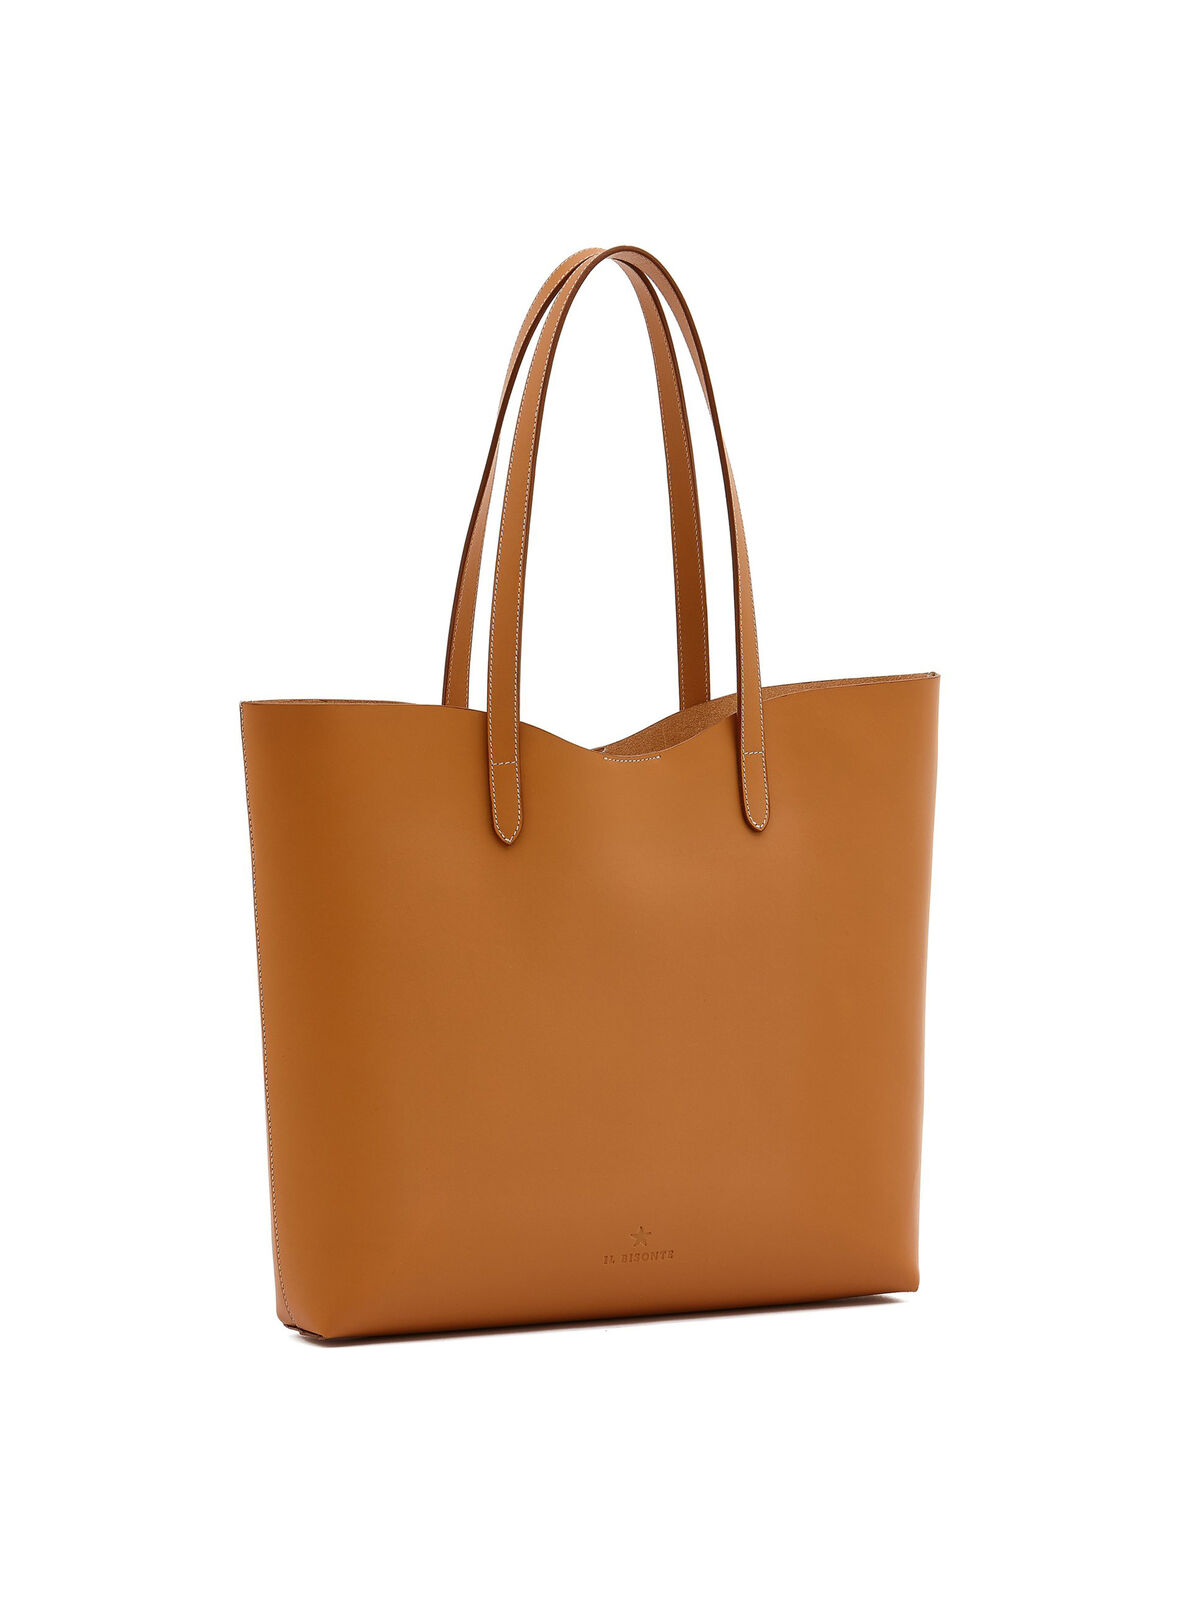 Il Bisonte - Large Leather Handle Tote Bag